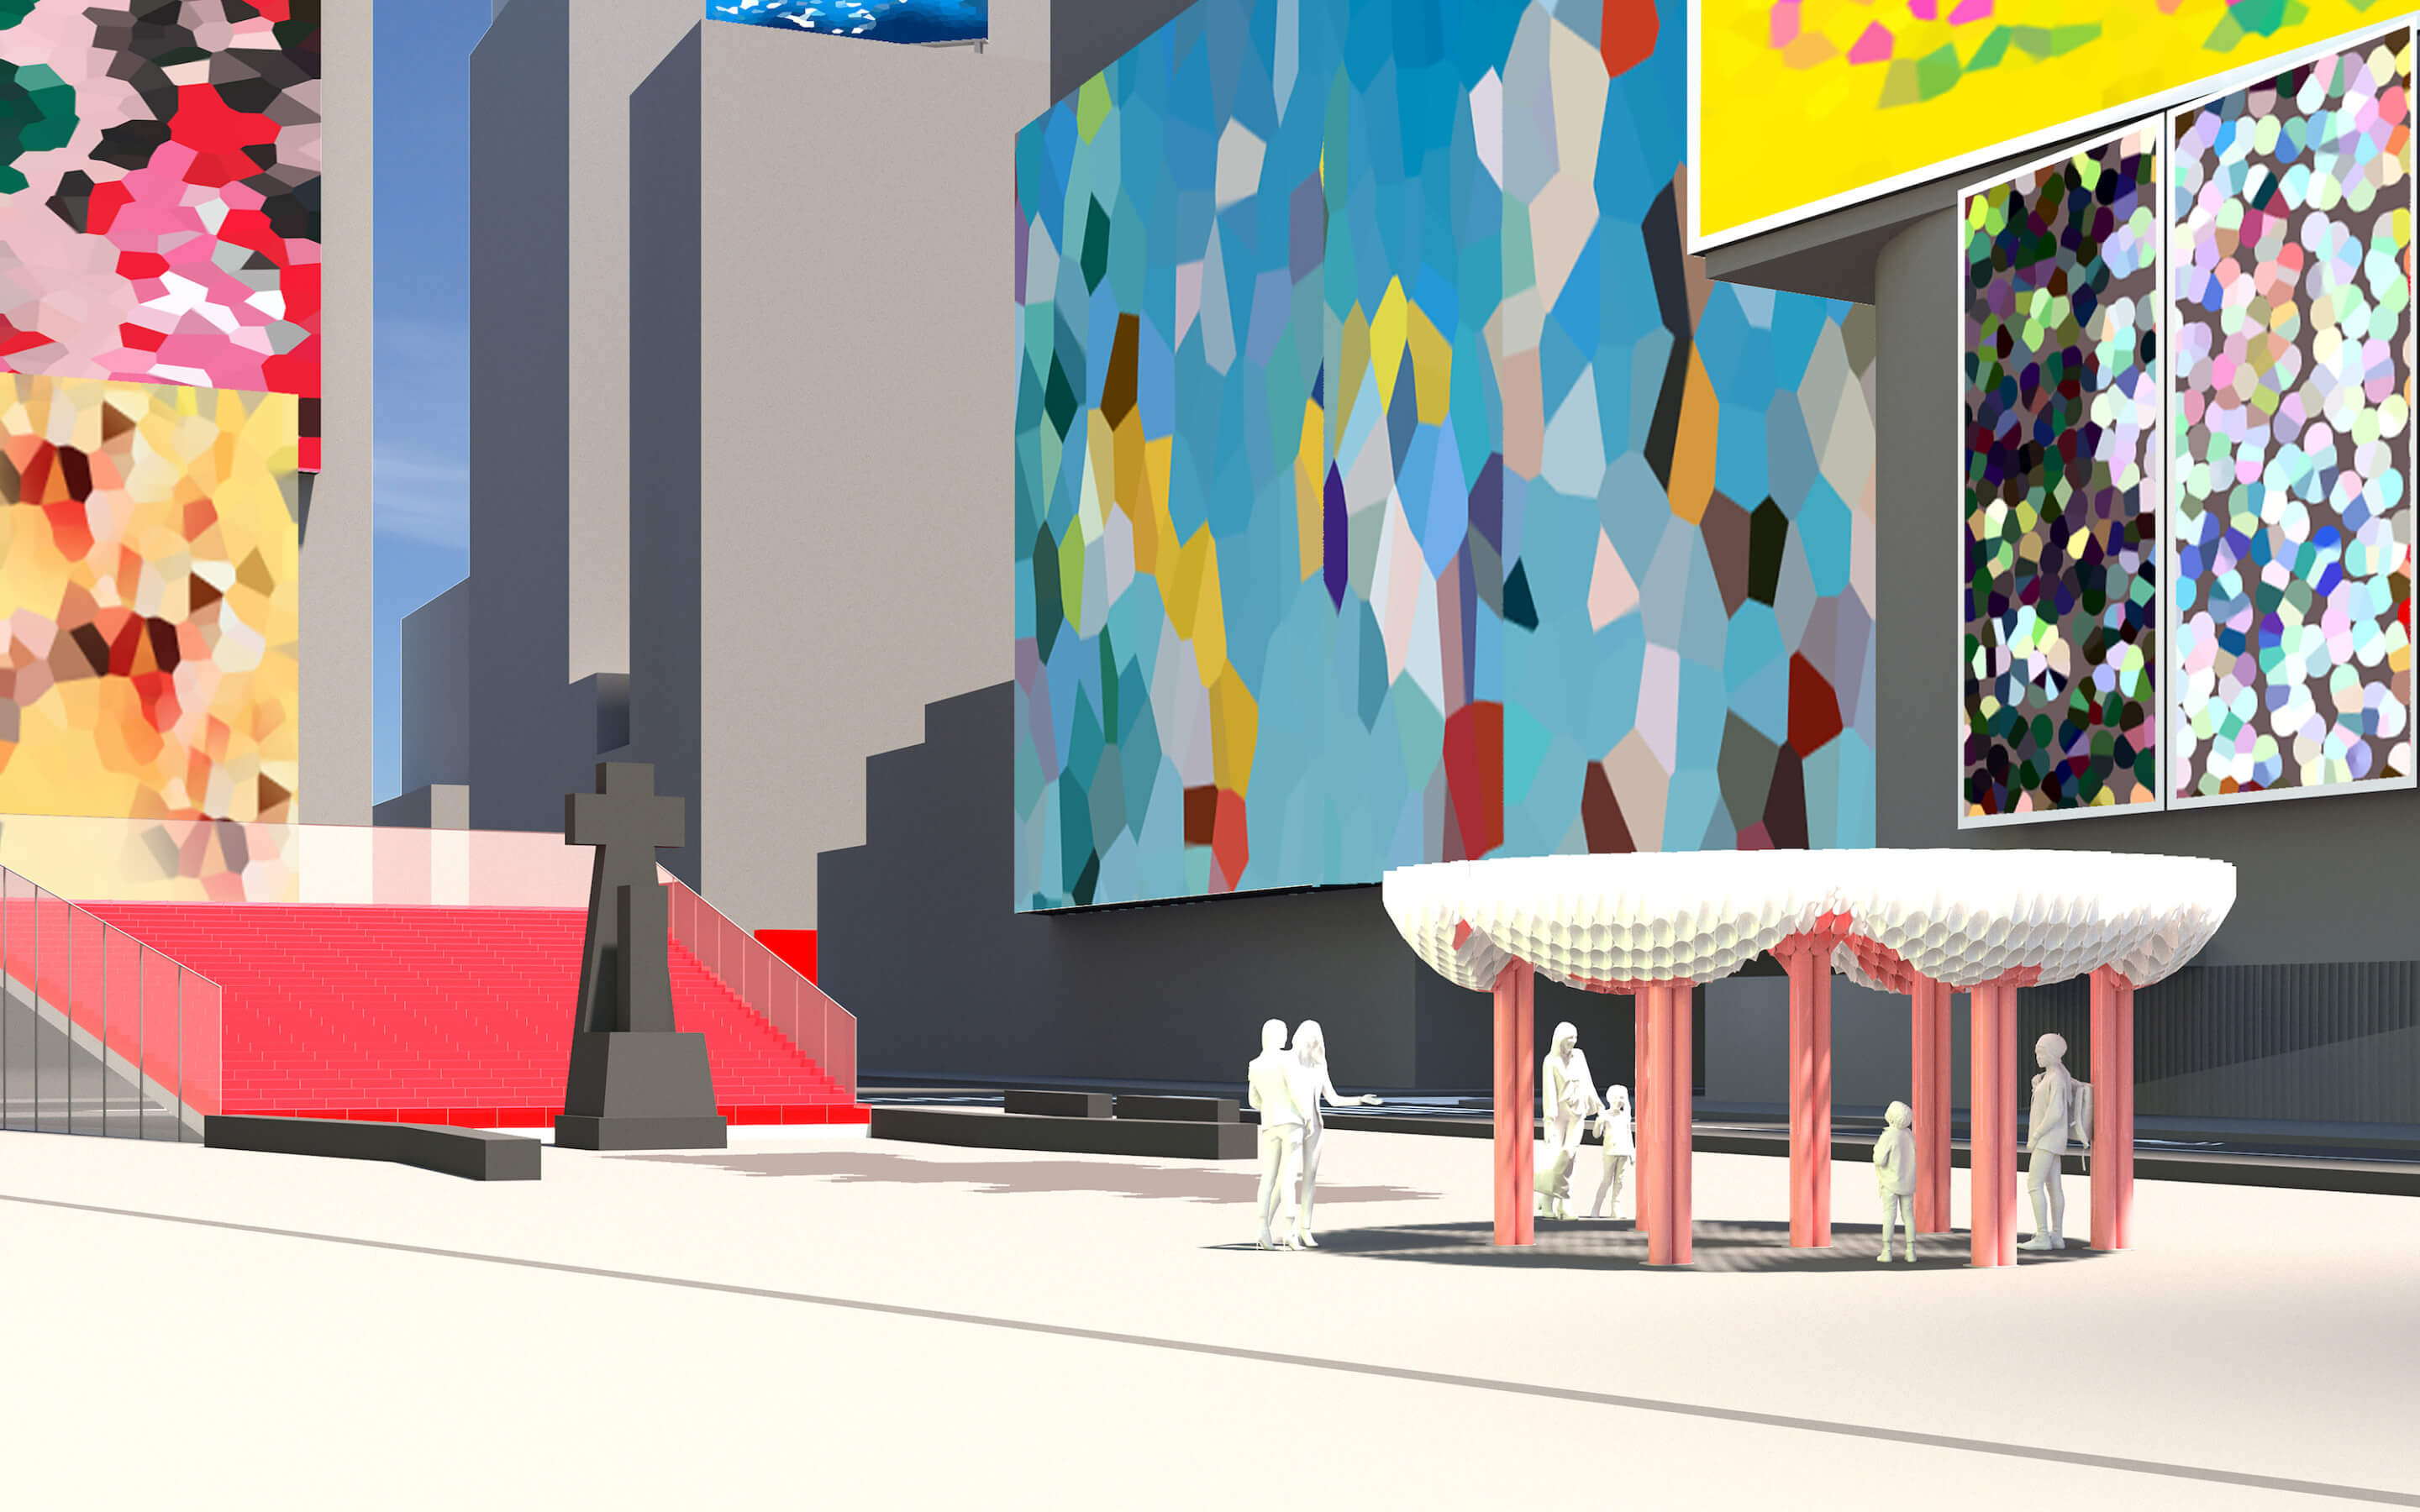 rendering of people standing beneath a heart-shaped pavilion in times square